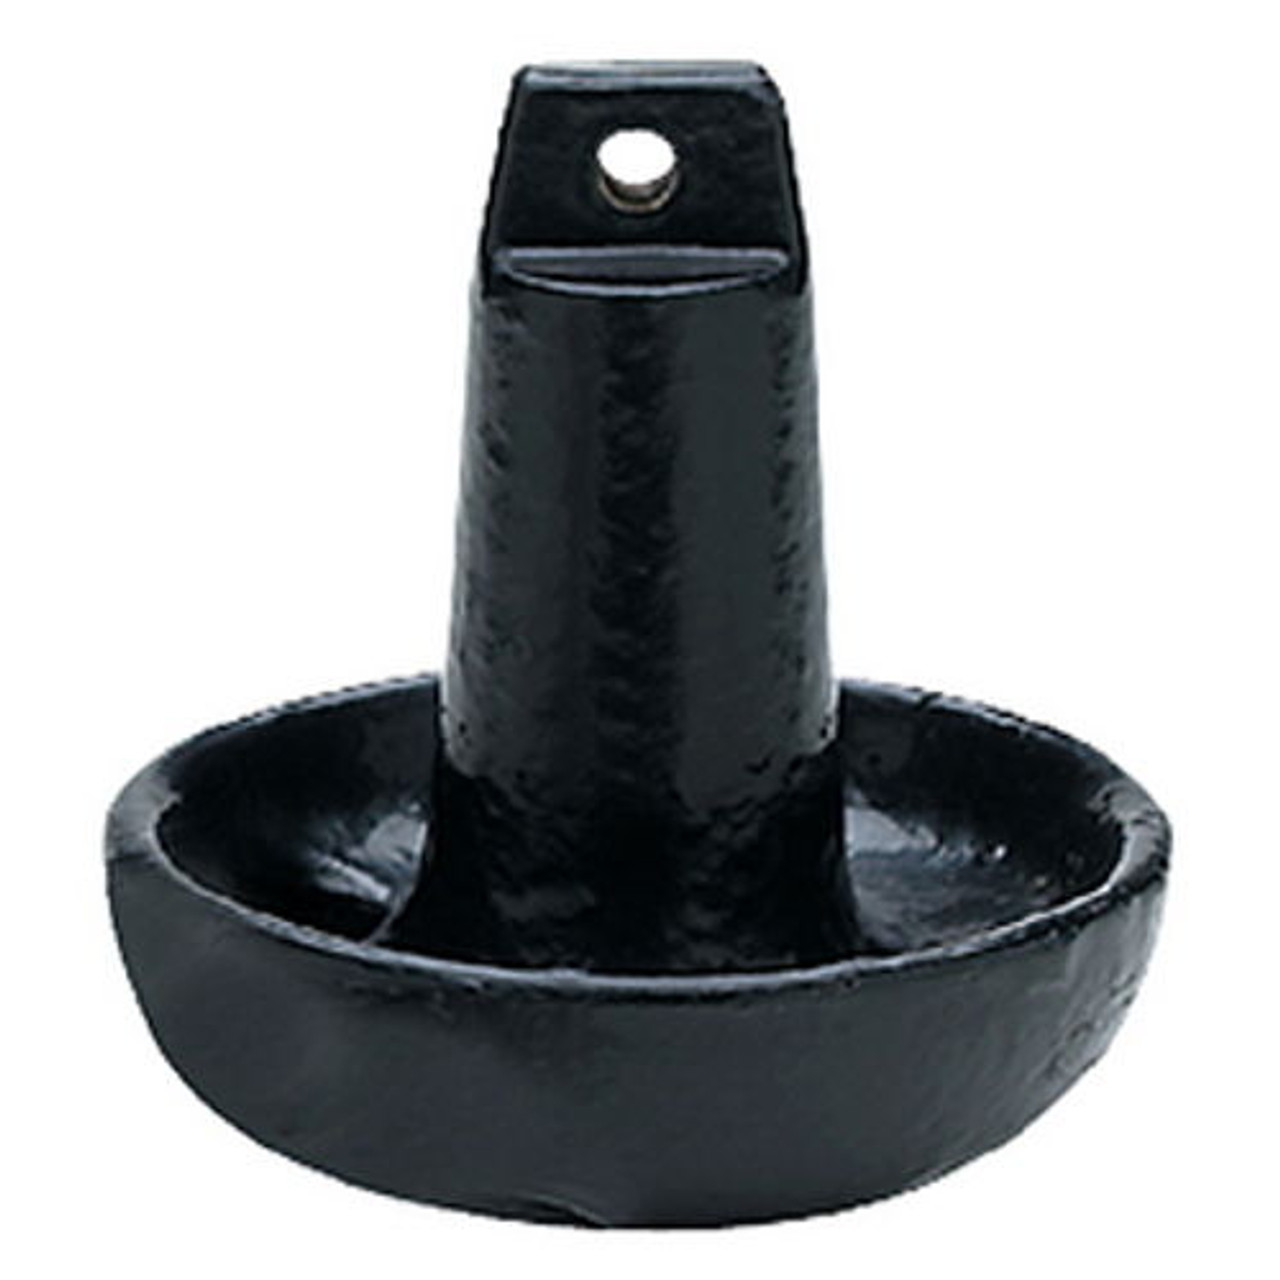 20 lb Black Vinly Coated Cast Iron Mushroom Anchor for Boats up to 24 Feet